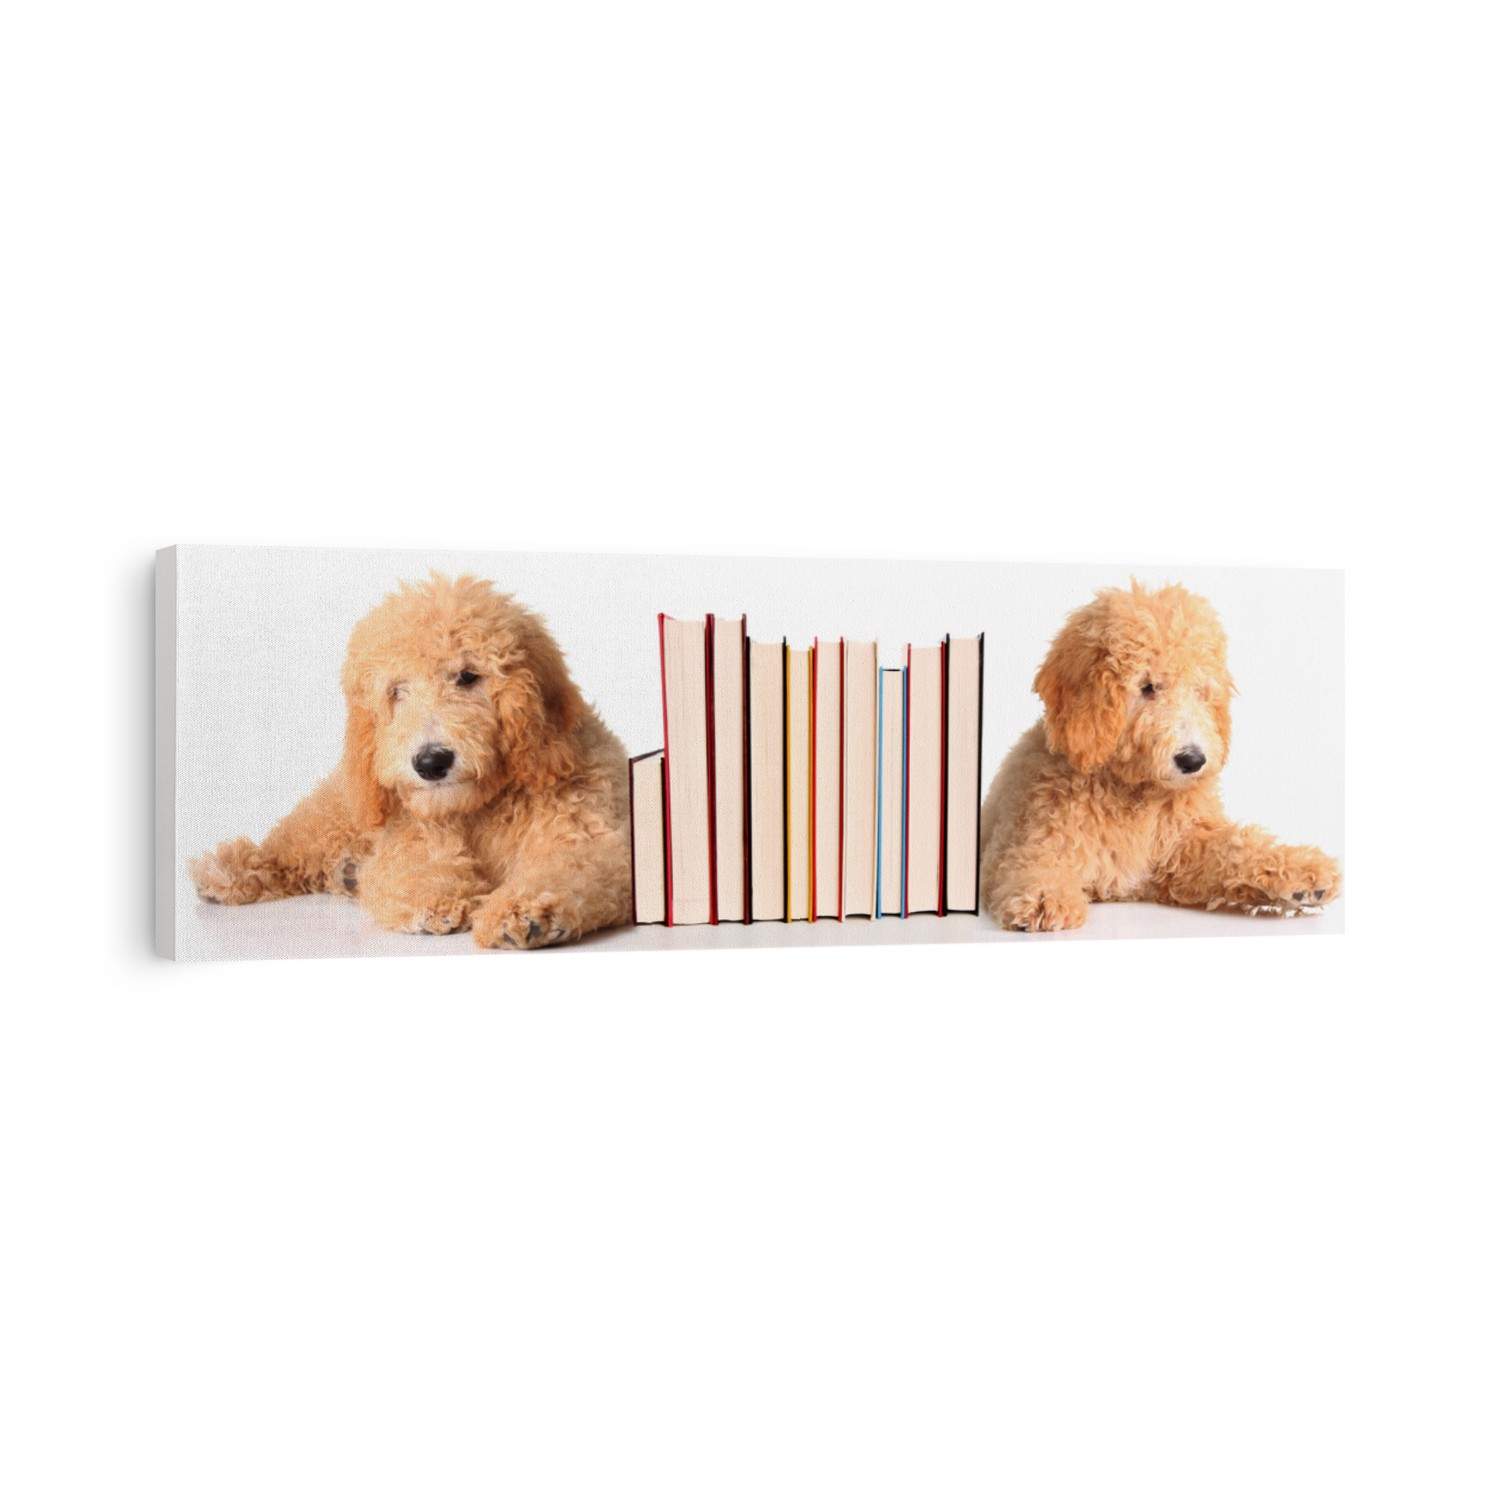 Two golden doodle puppies as bookends.